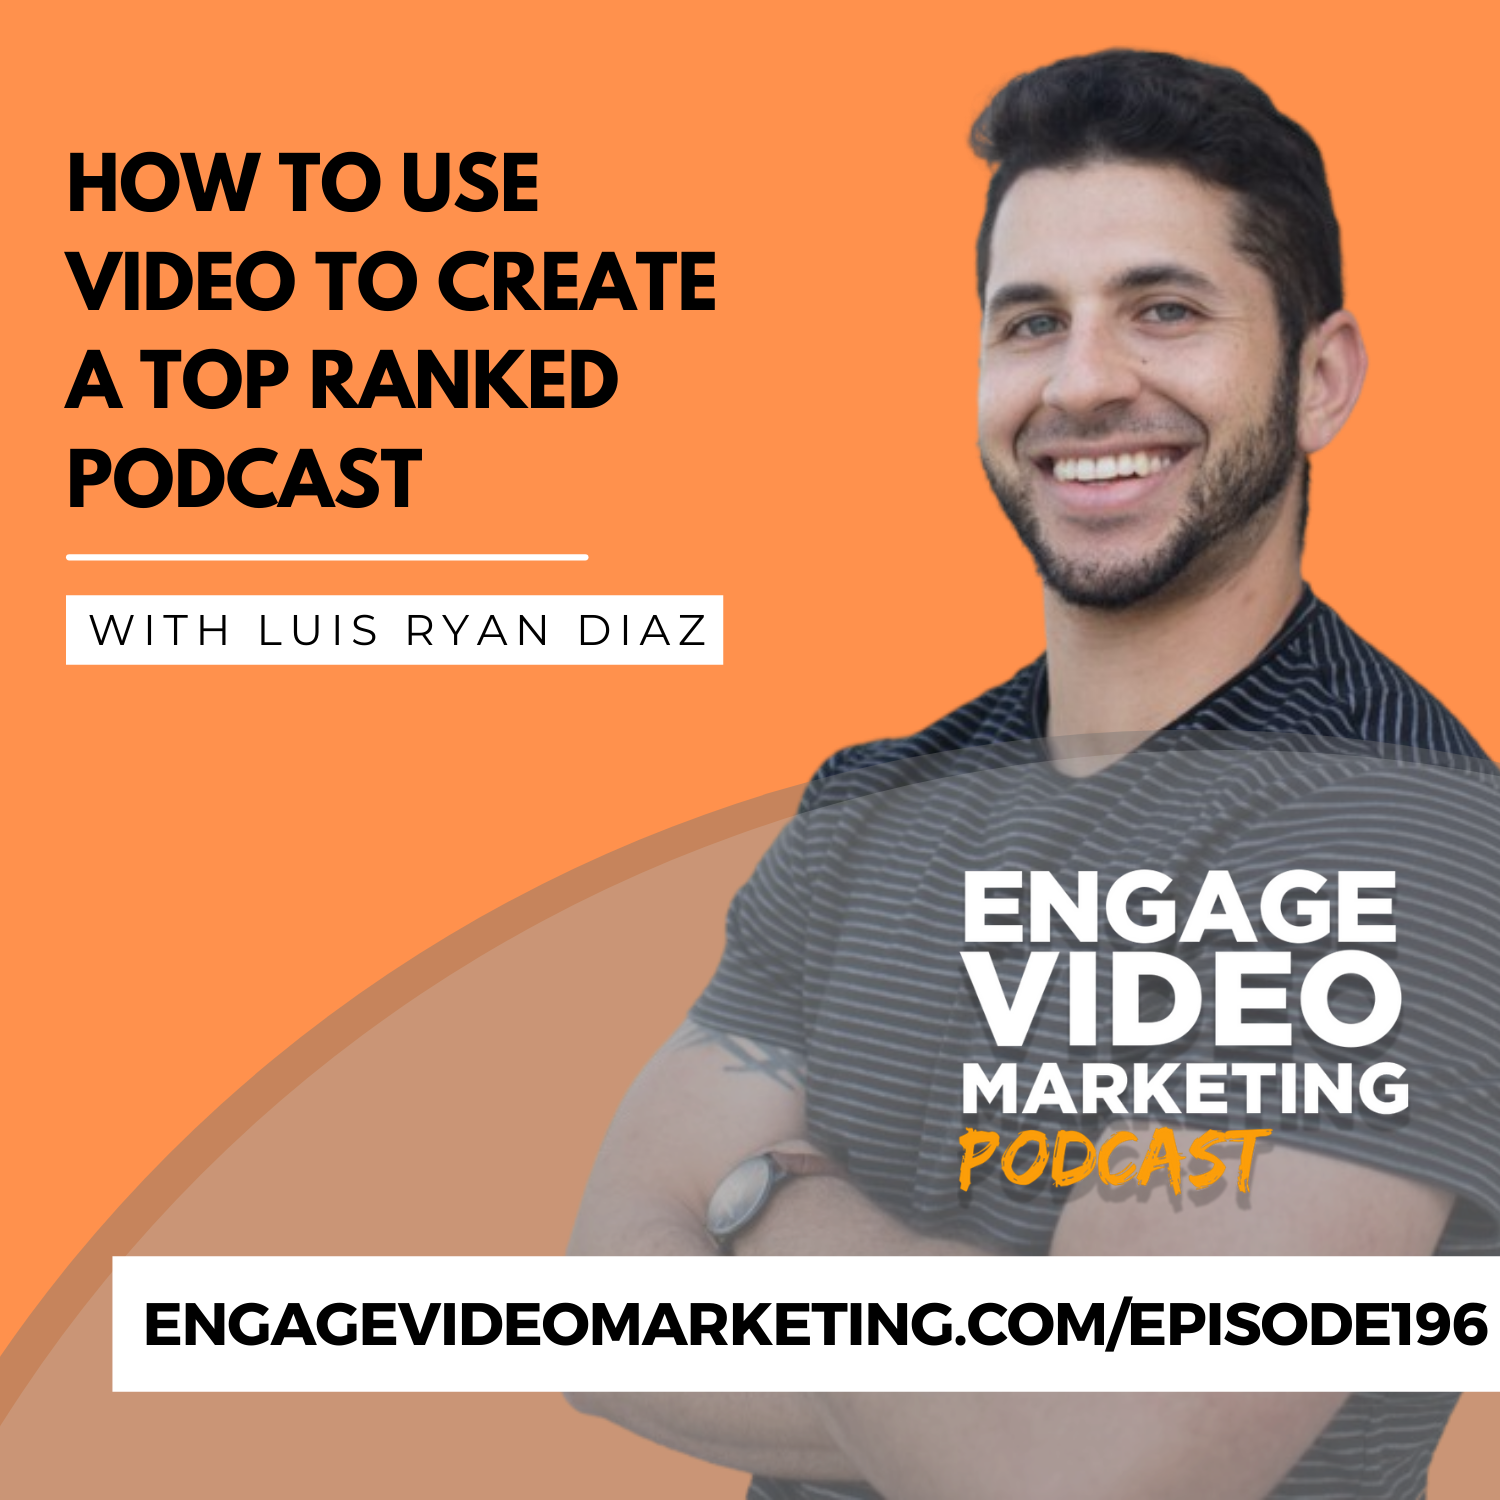 How to Use Video to Create a Top Ranked Podcast with Luis Ryan Diaz